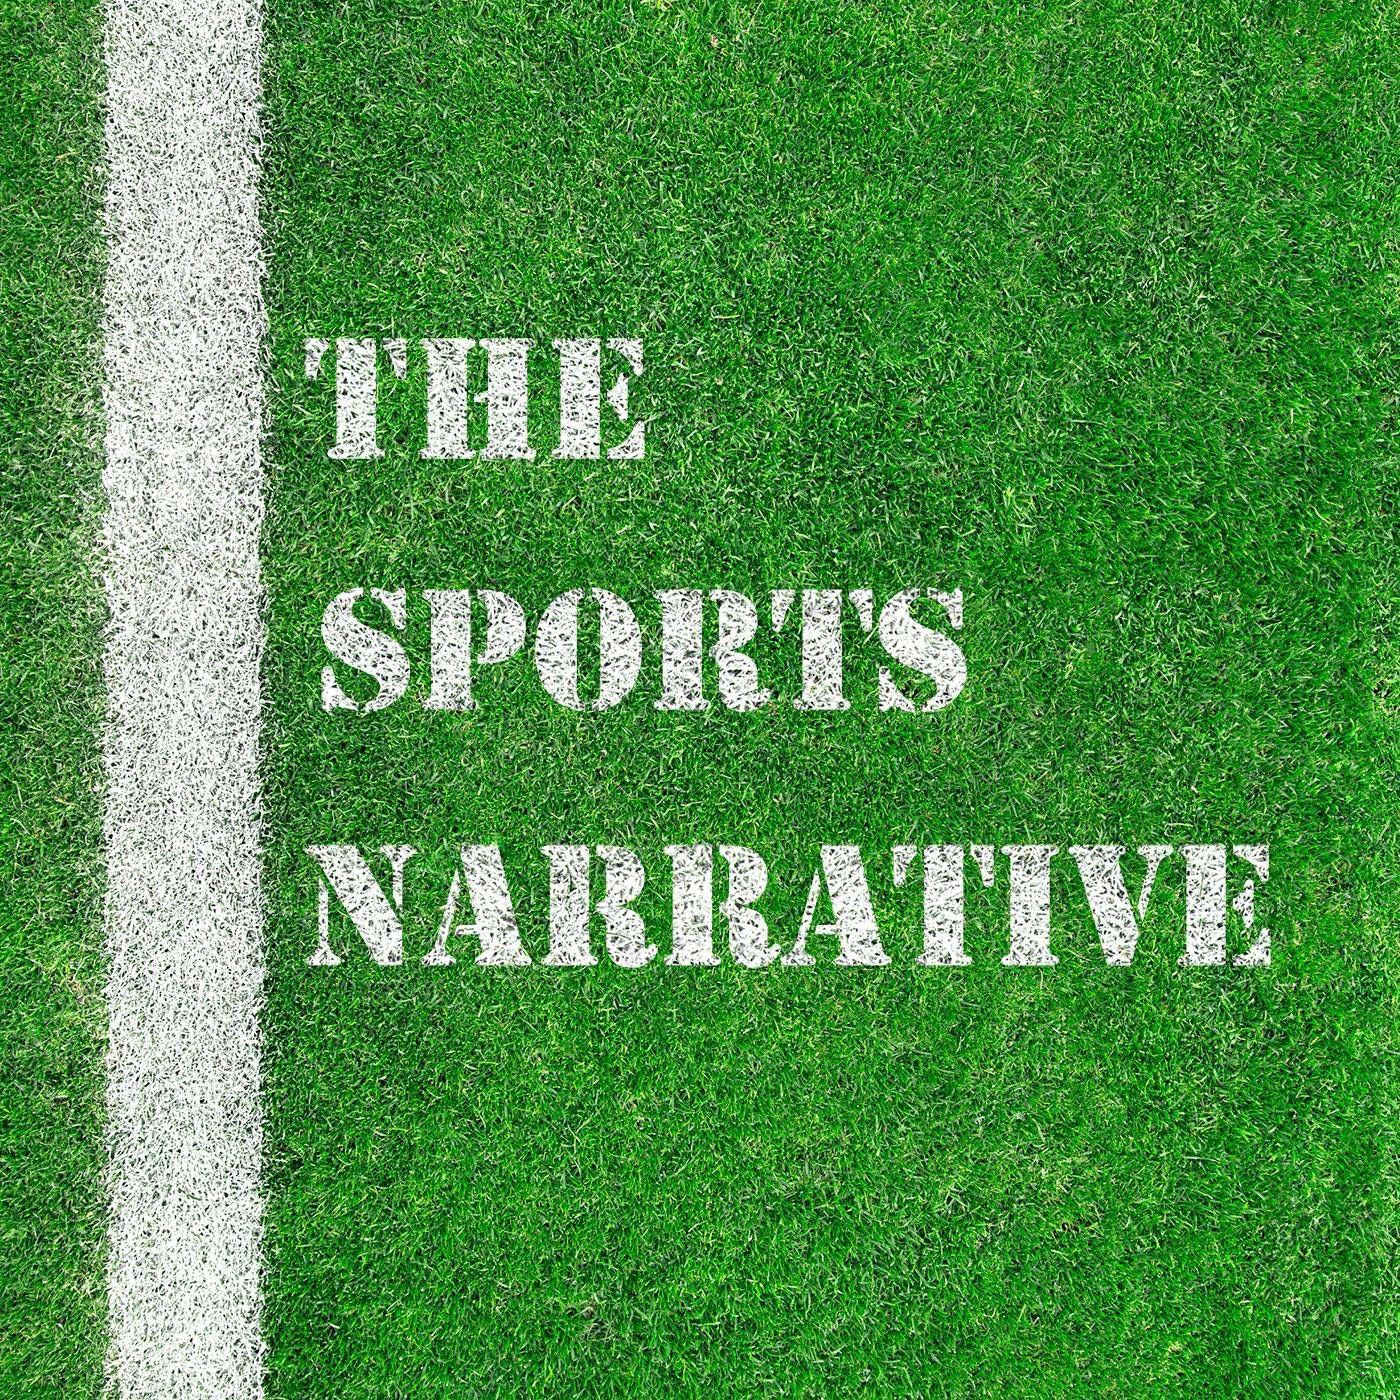 The Sports Narrative Network